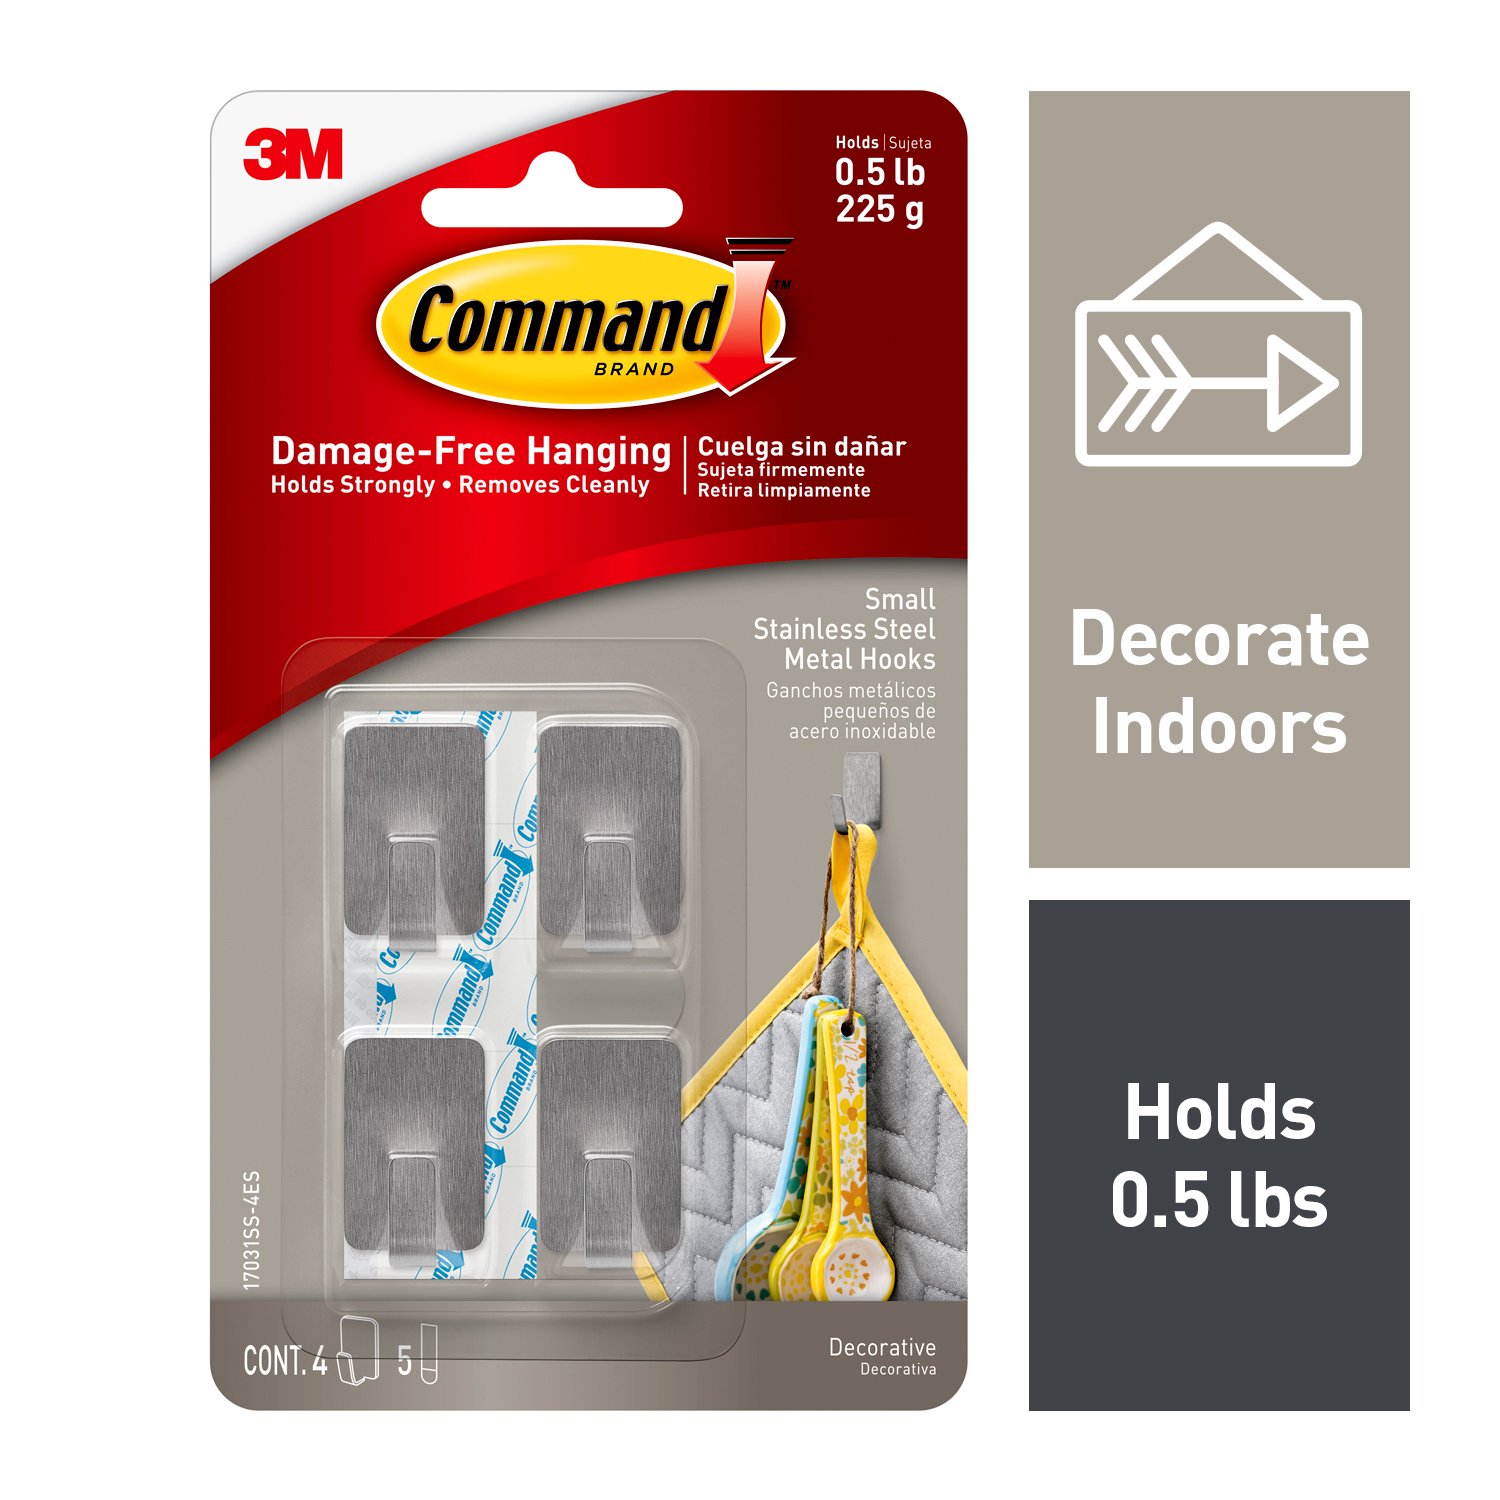 7100157735 - Command Small Stainless Steel Metal Hooks, 17031SS-4ES, 4 Hooks, 5
Strips